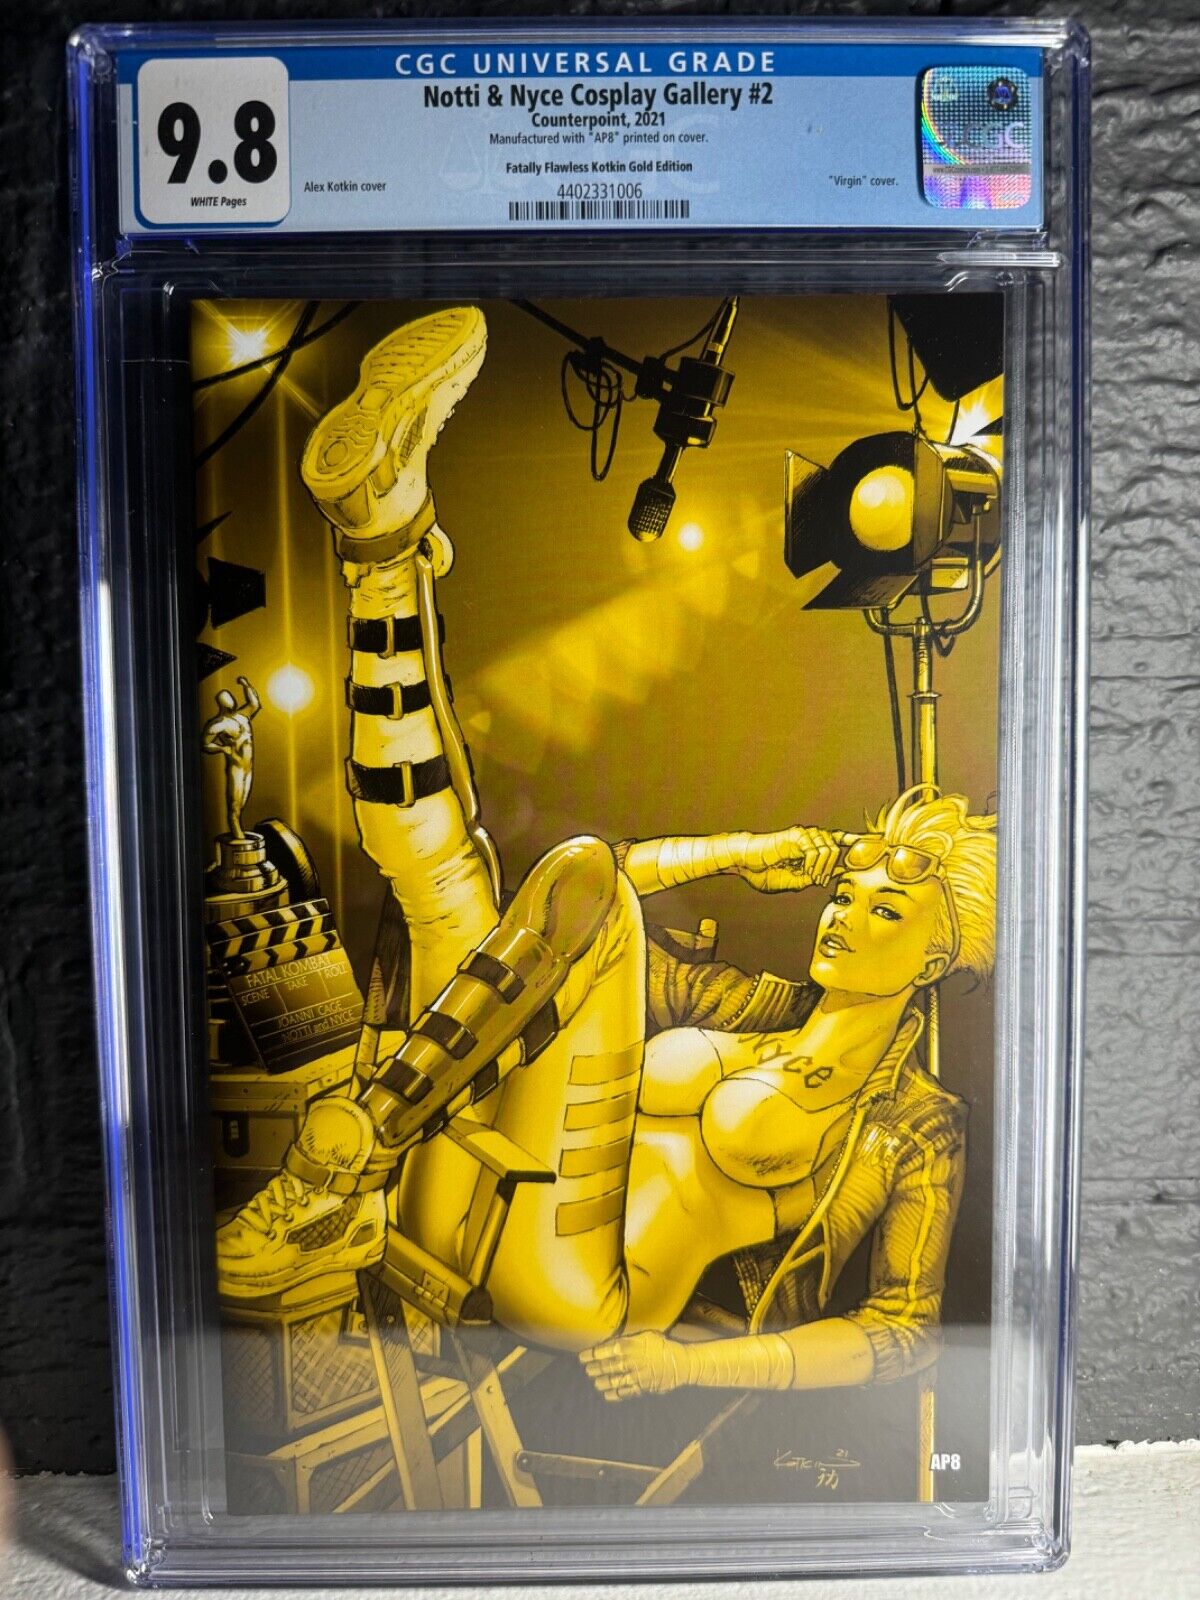 Notti & Nyce Cosplay Gallery #2 Fatally Flawless Kotkin Gold Edition AP8 CGC 9.8